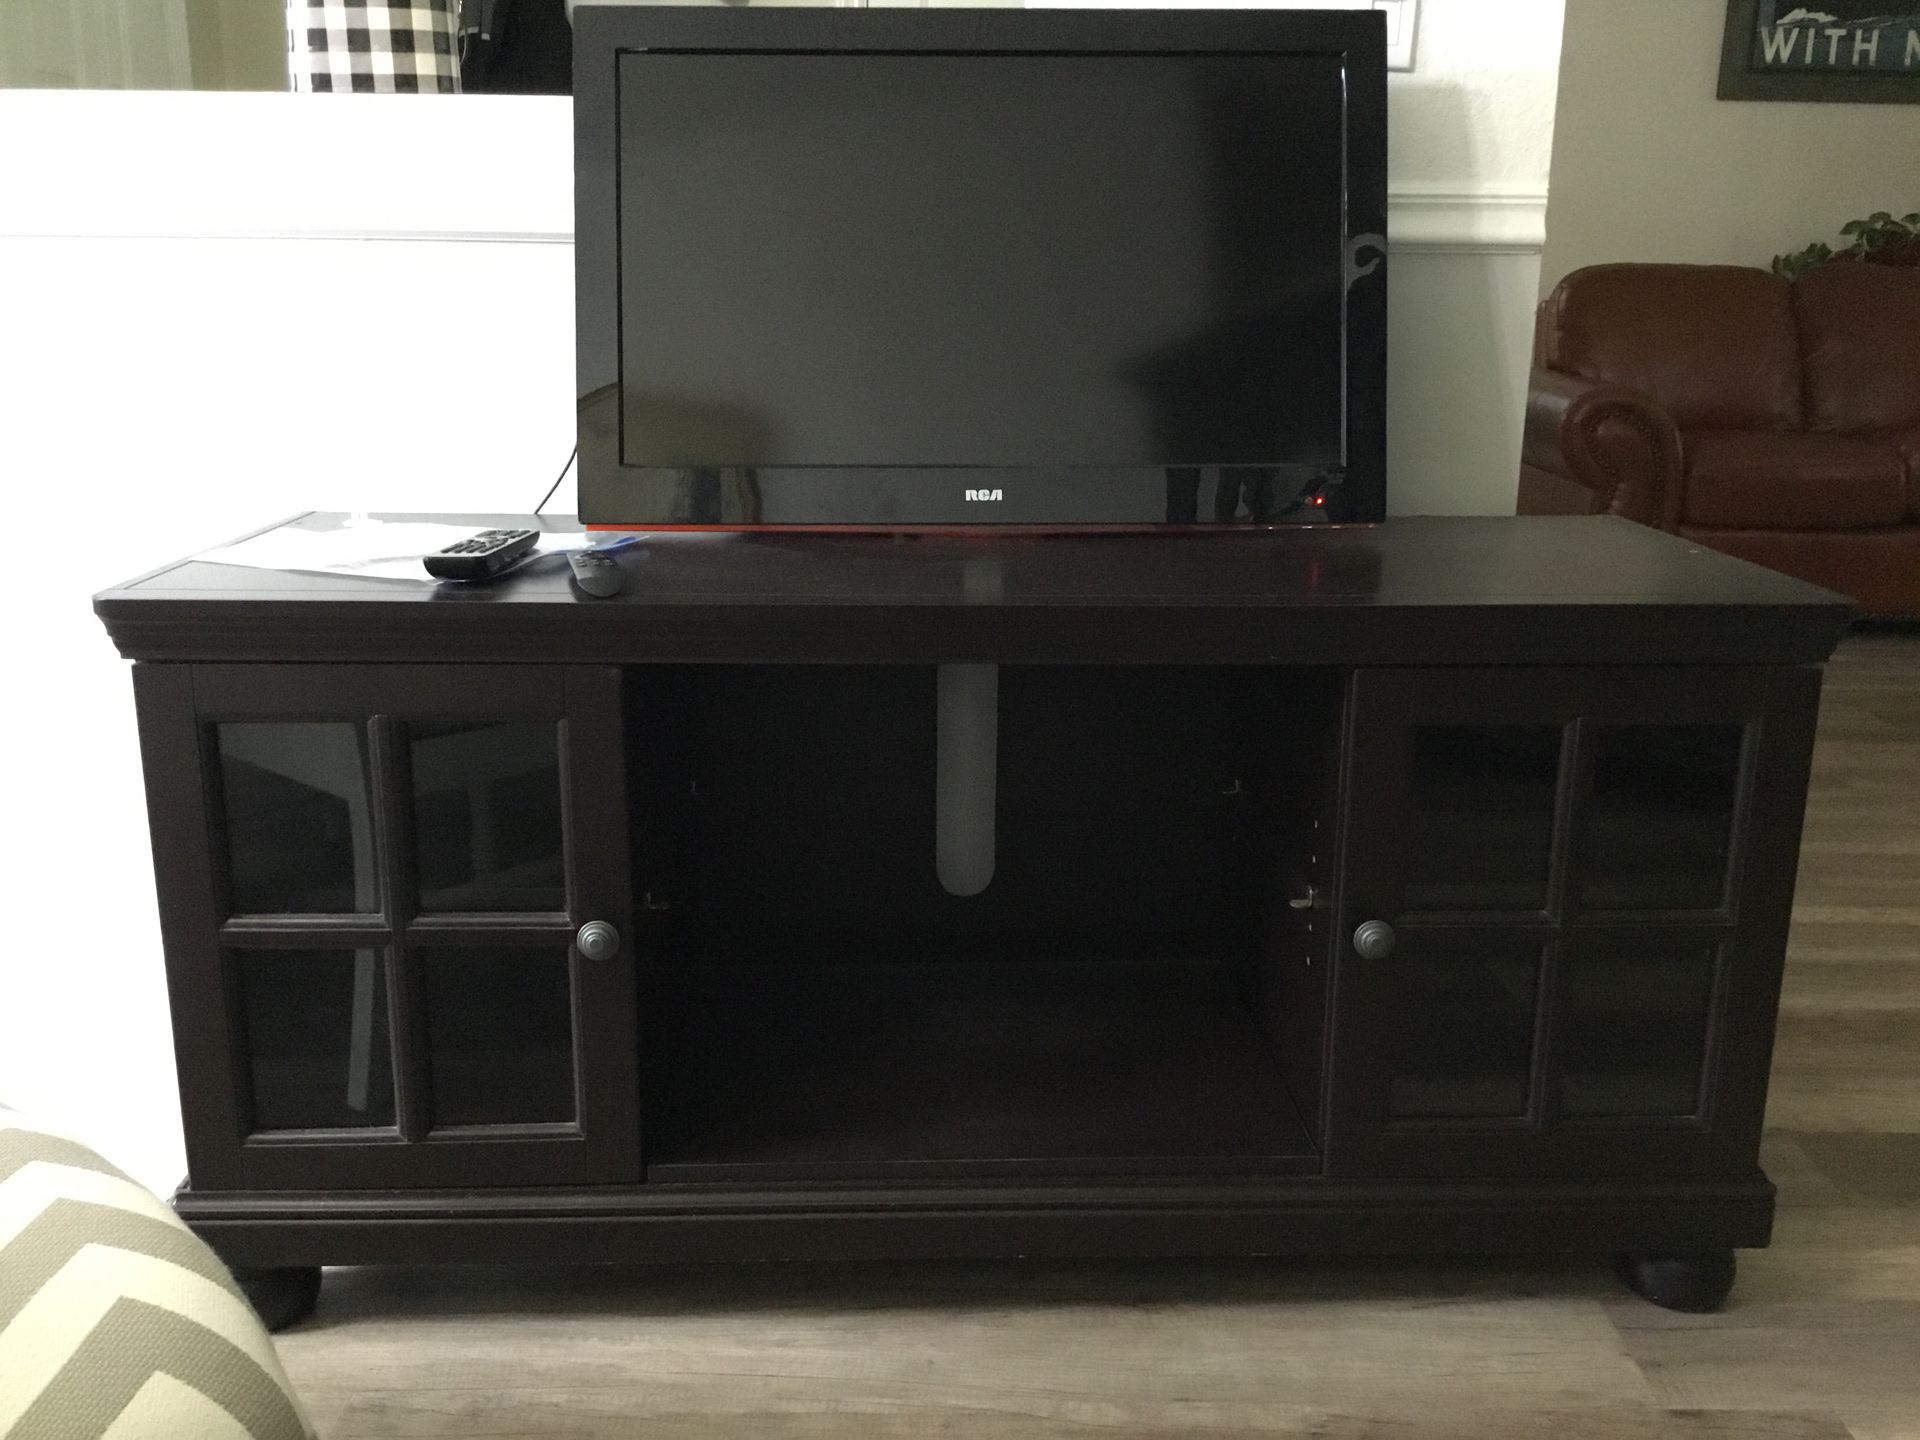 Combo entertainment center with tv and fire stick